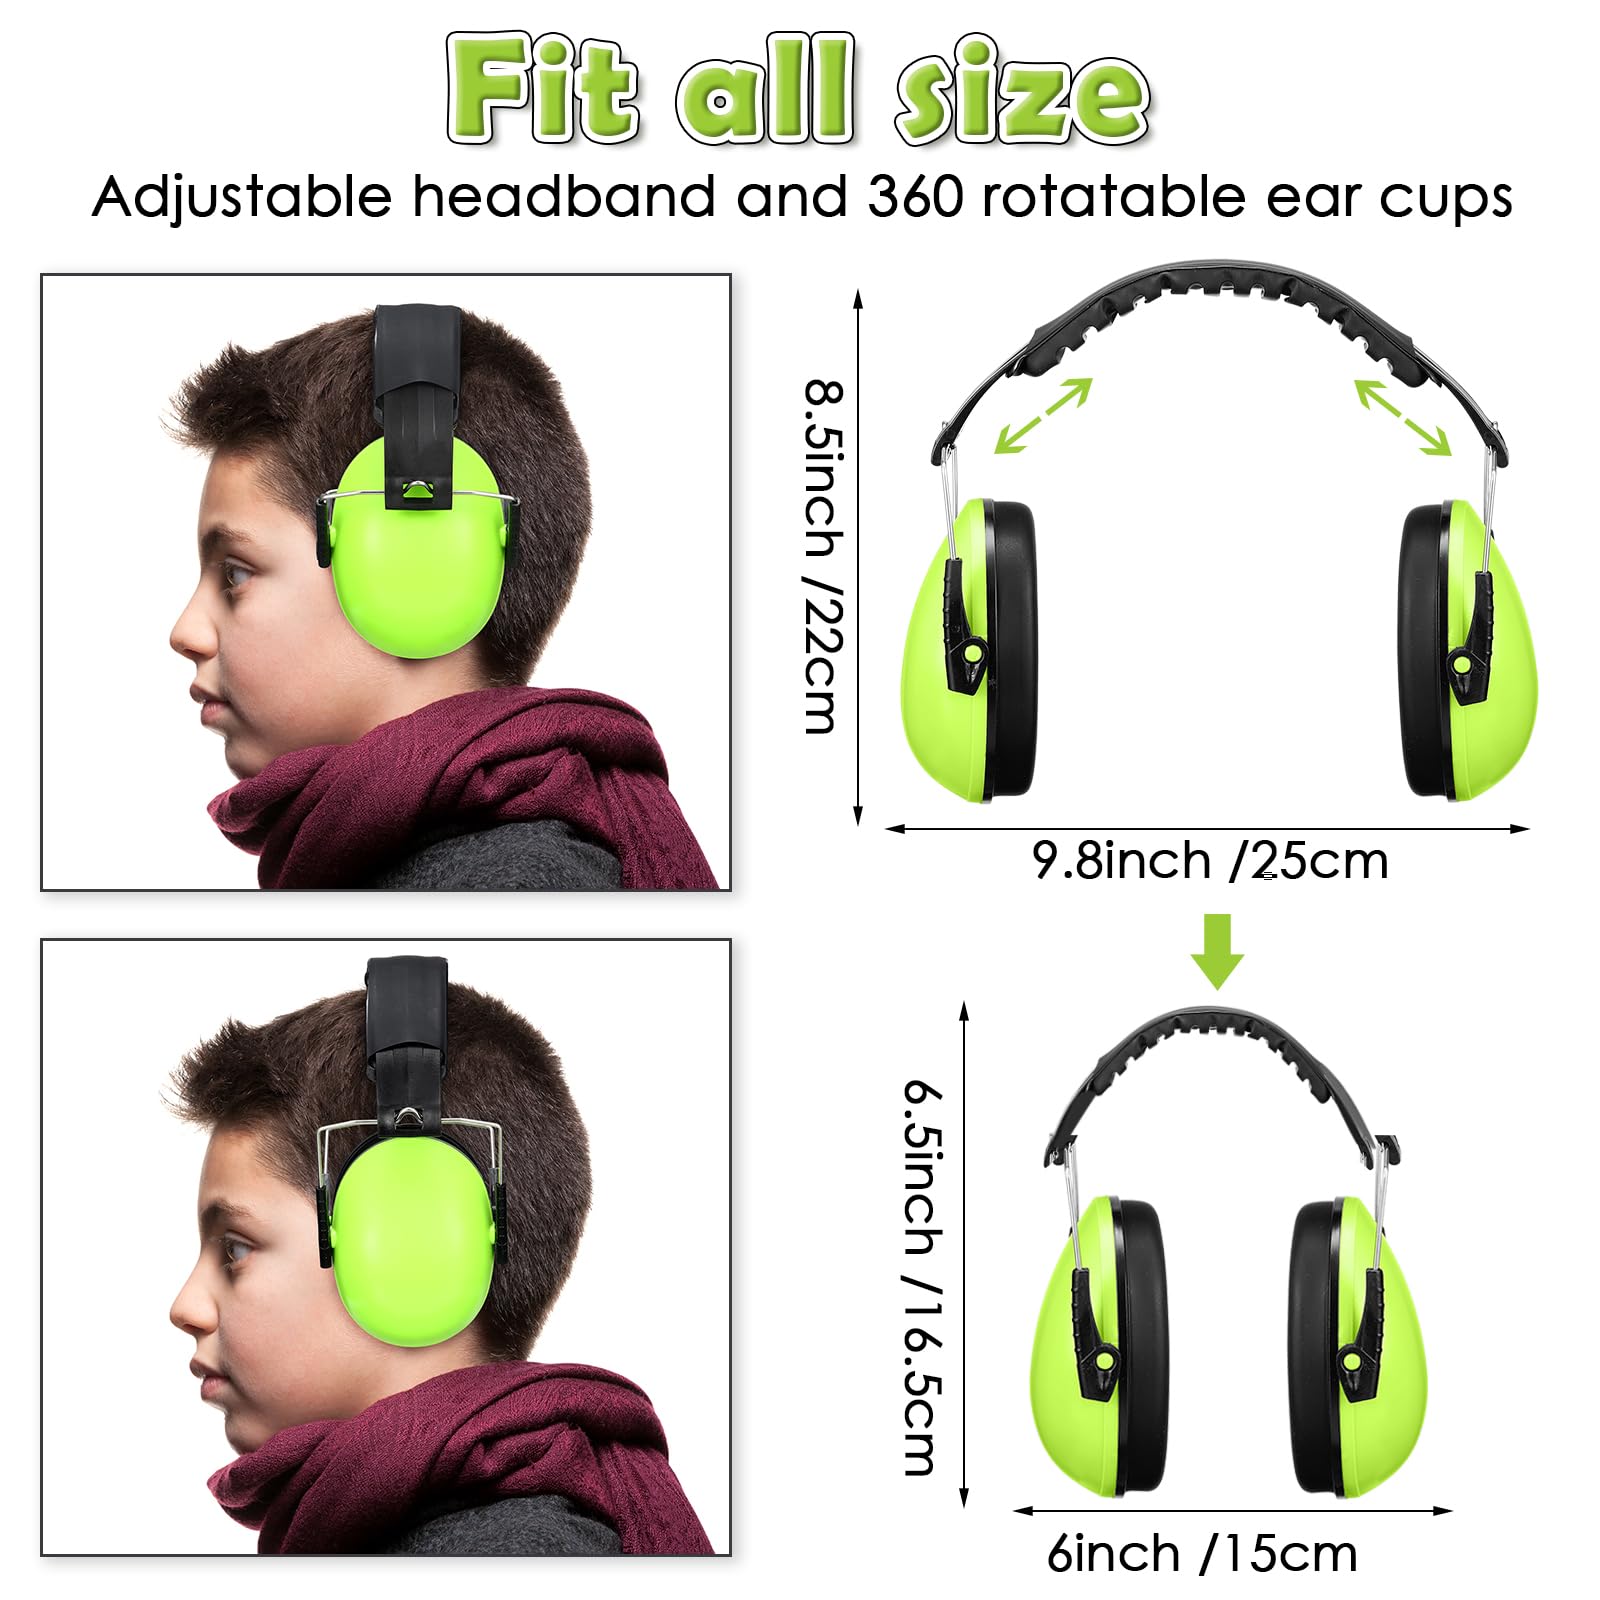 Yunsailing Kids Noise Canceling Reduction Headphones 26dB Adjustable Ear Protection Headphone Ear Muffs for Autism Sleeping(Pink, Blue, Green, 3 Pack)